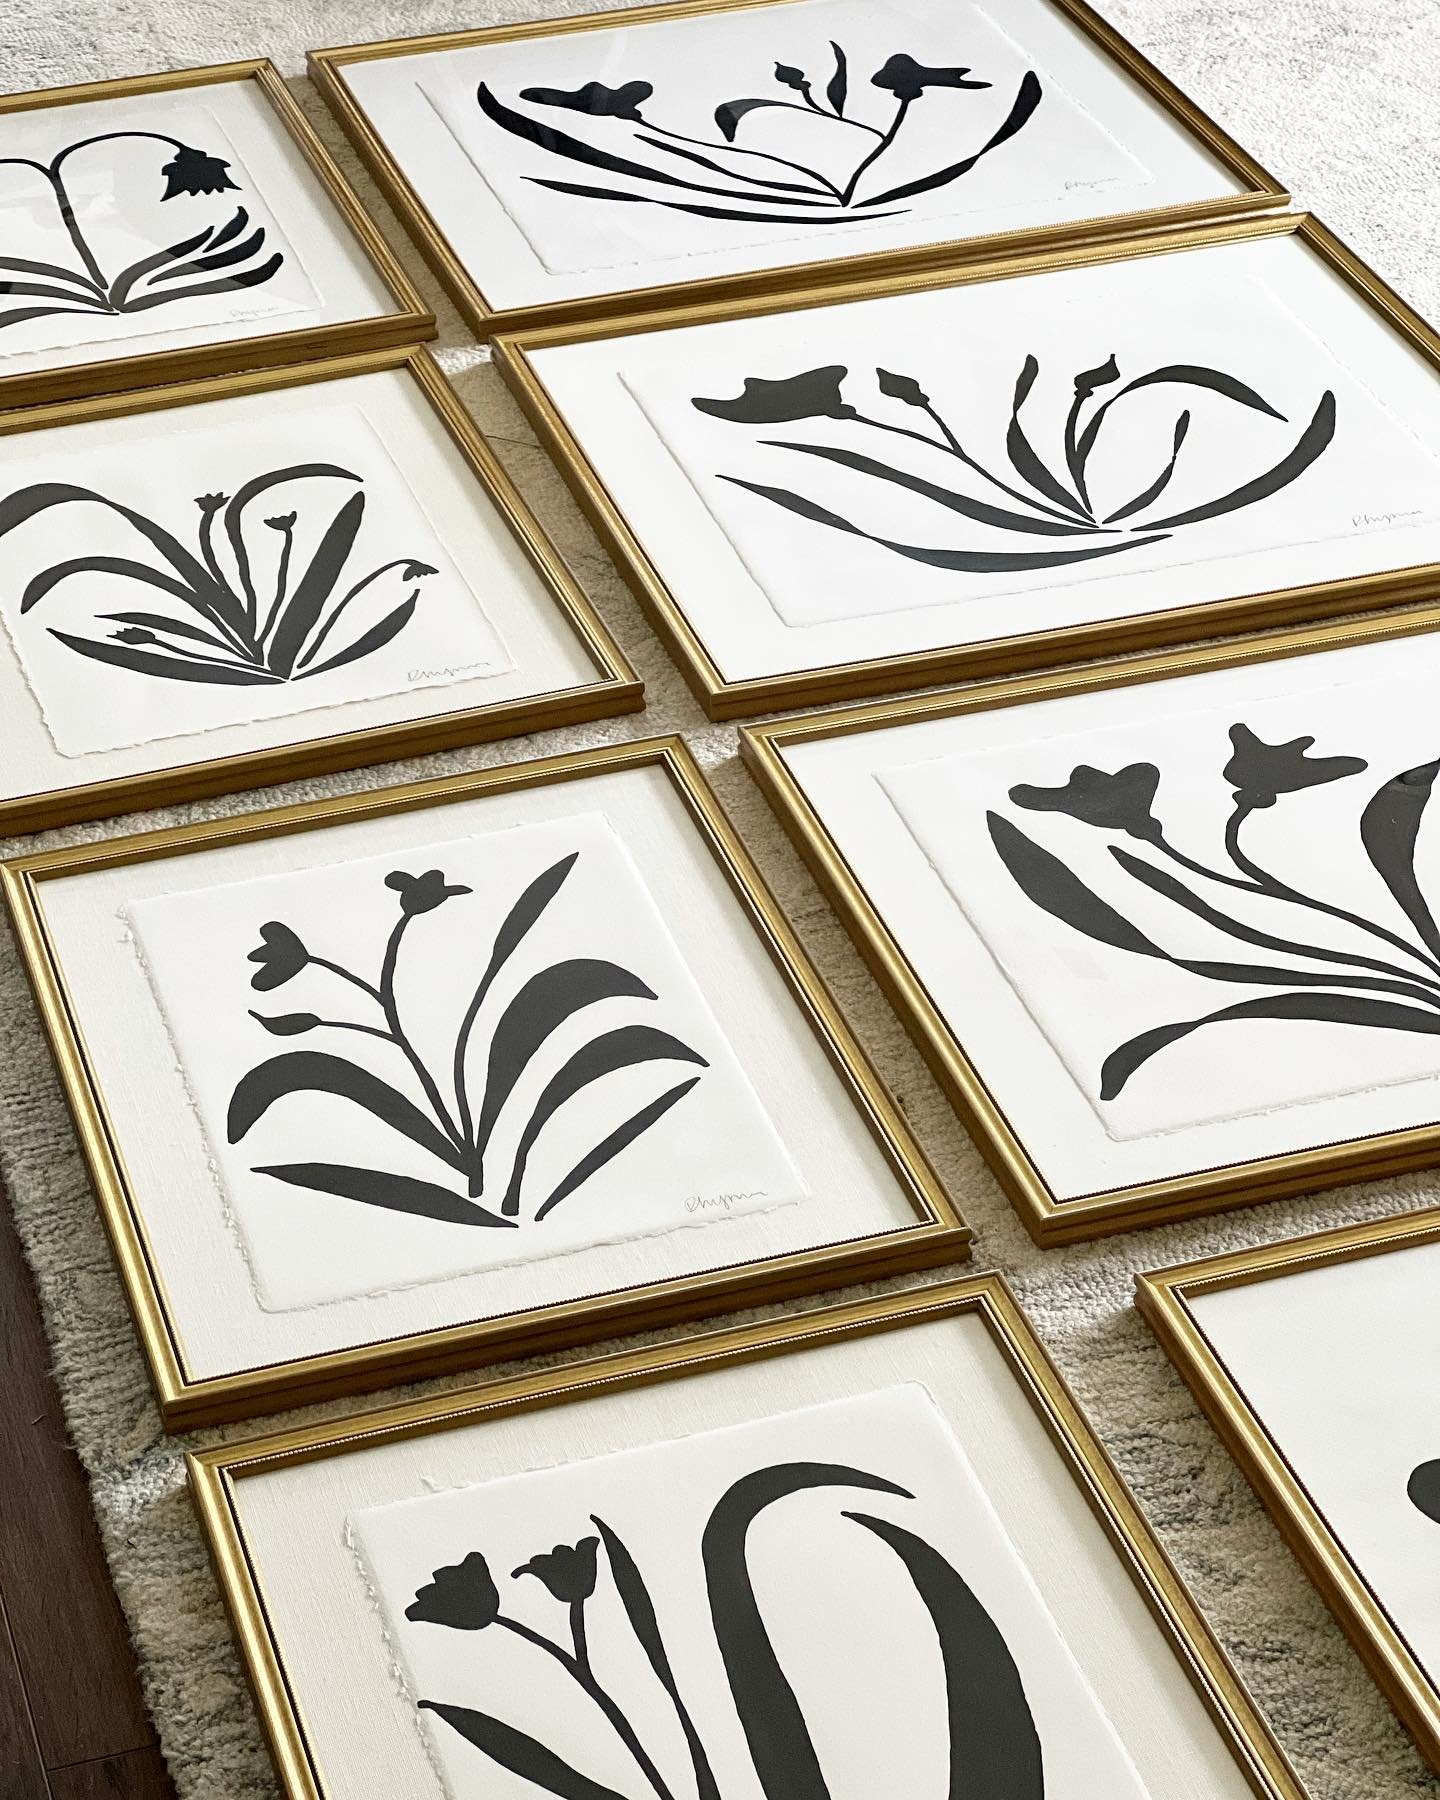 French Ink Florals, each hand painted with a rich black French Ink on beautiful Italian paper I found while on the Amalfi Coast in Italy. This antique hand pressed paper is my favorite and has been made by the same family for generations.